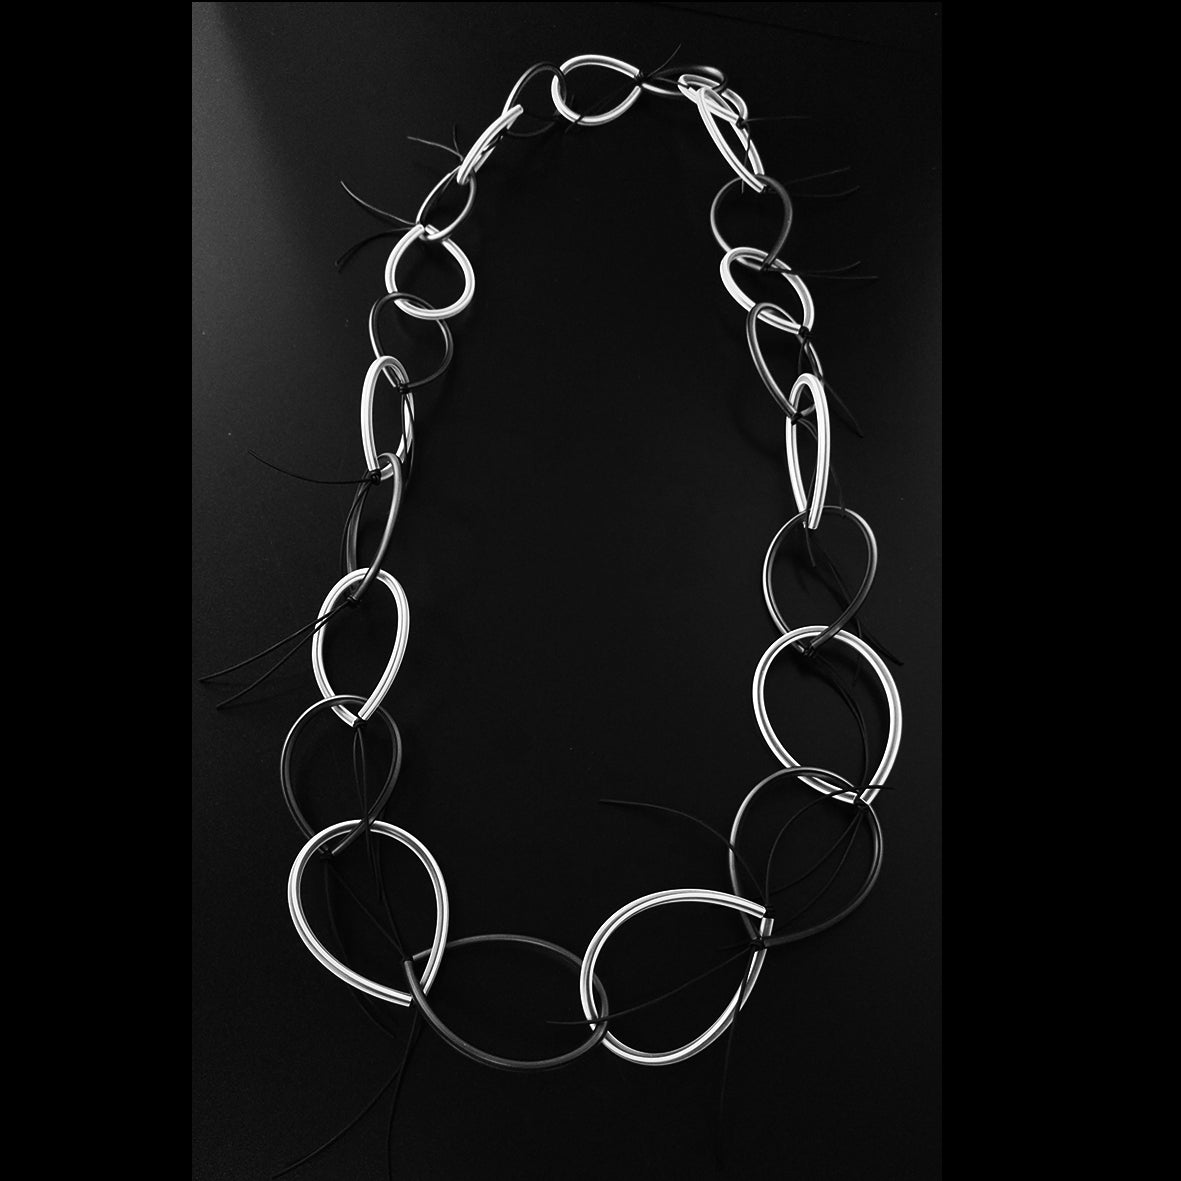 KAMPALA long "chain" necklace Black and White